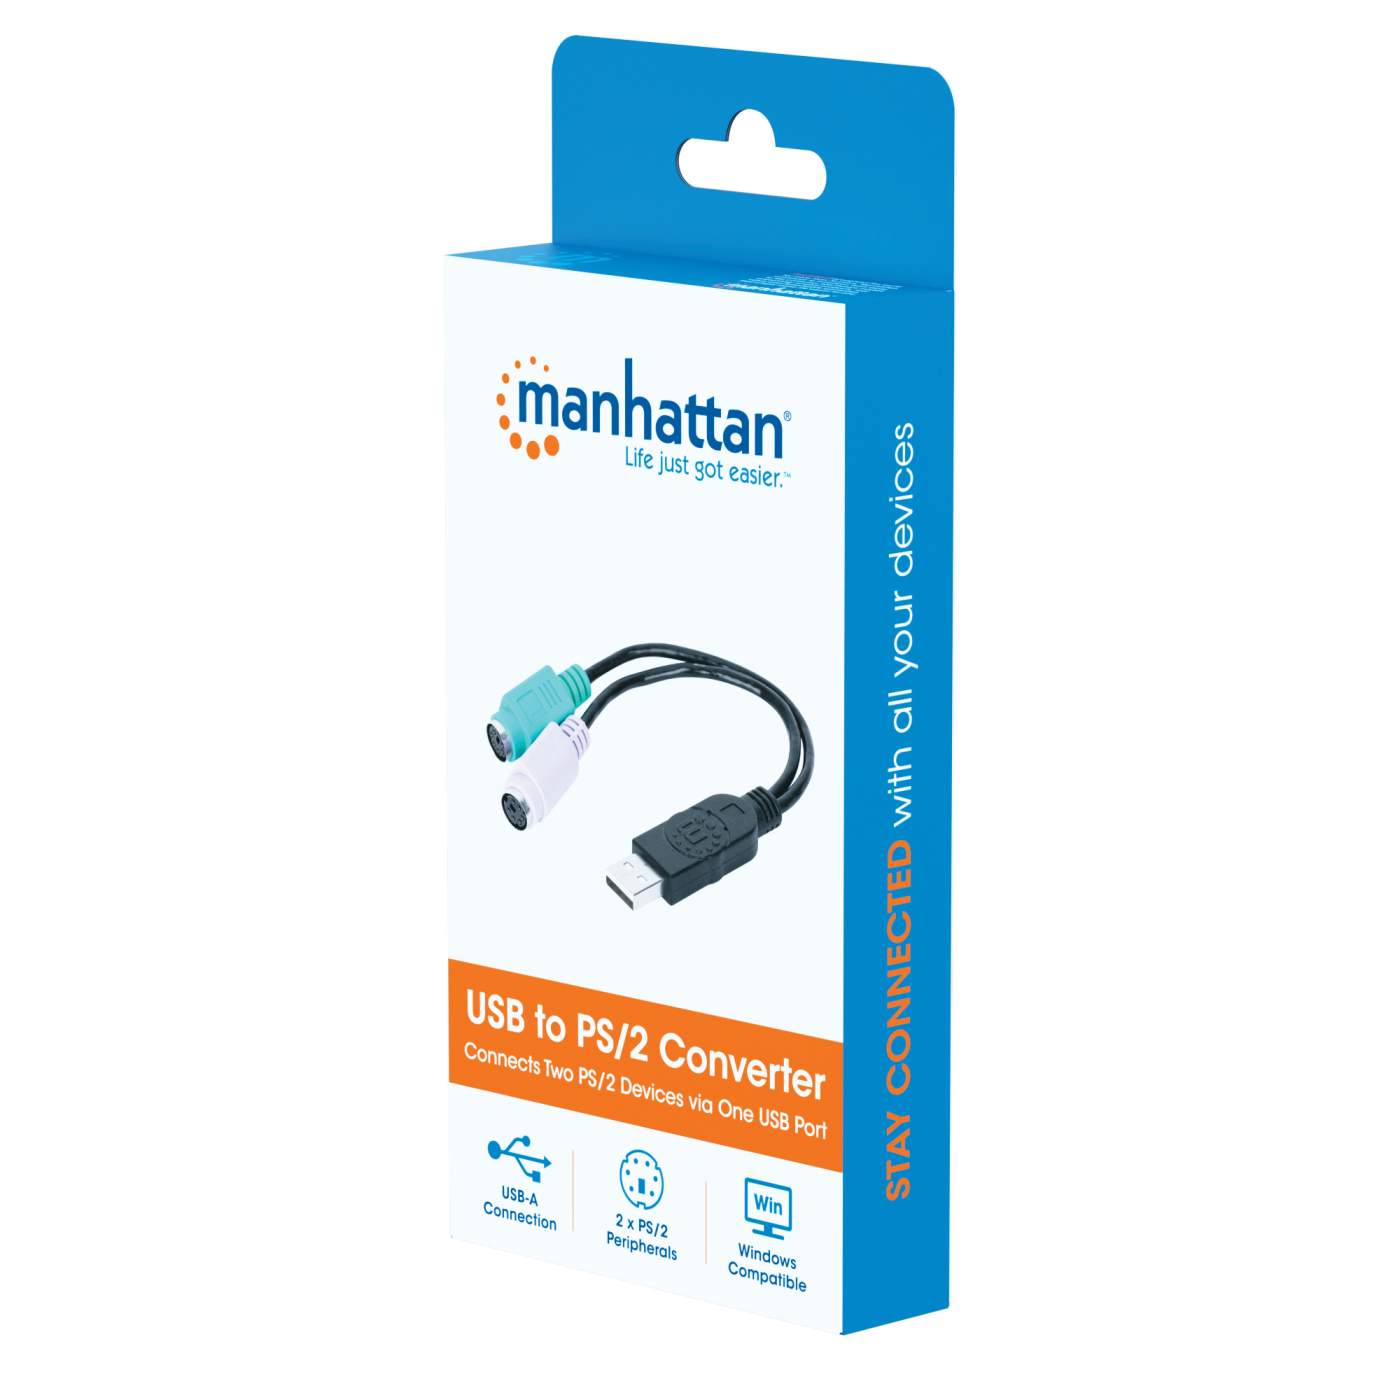 USB to PS/2 Converter Packaging Image 2